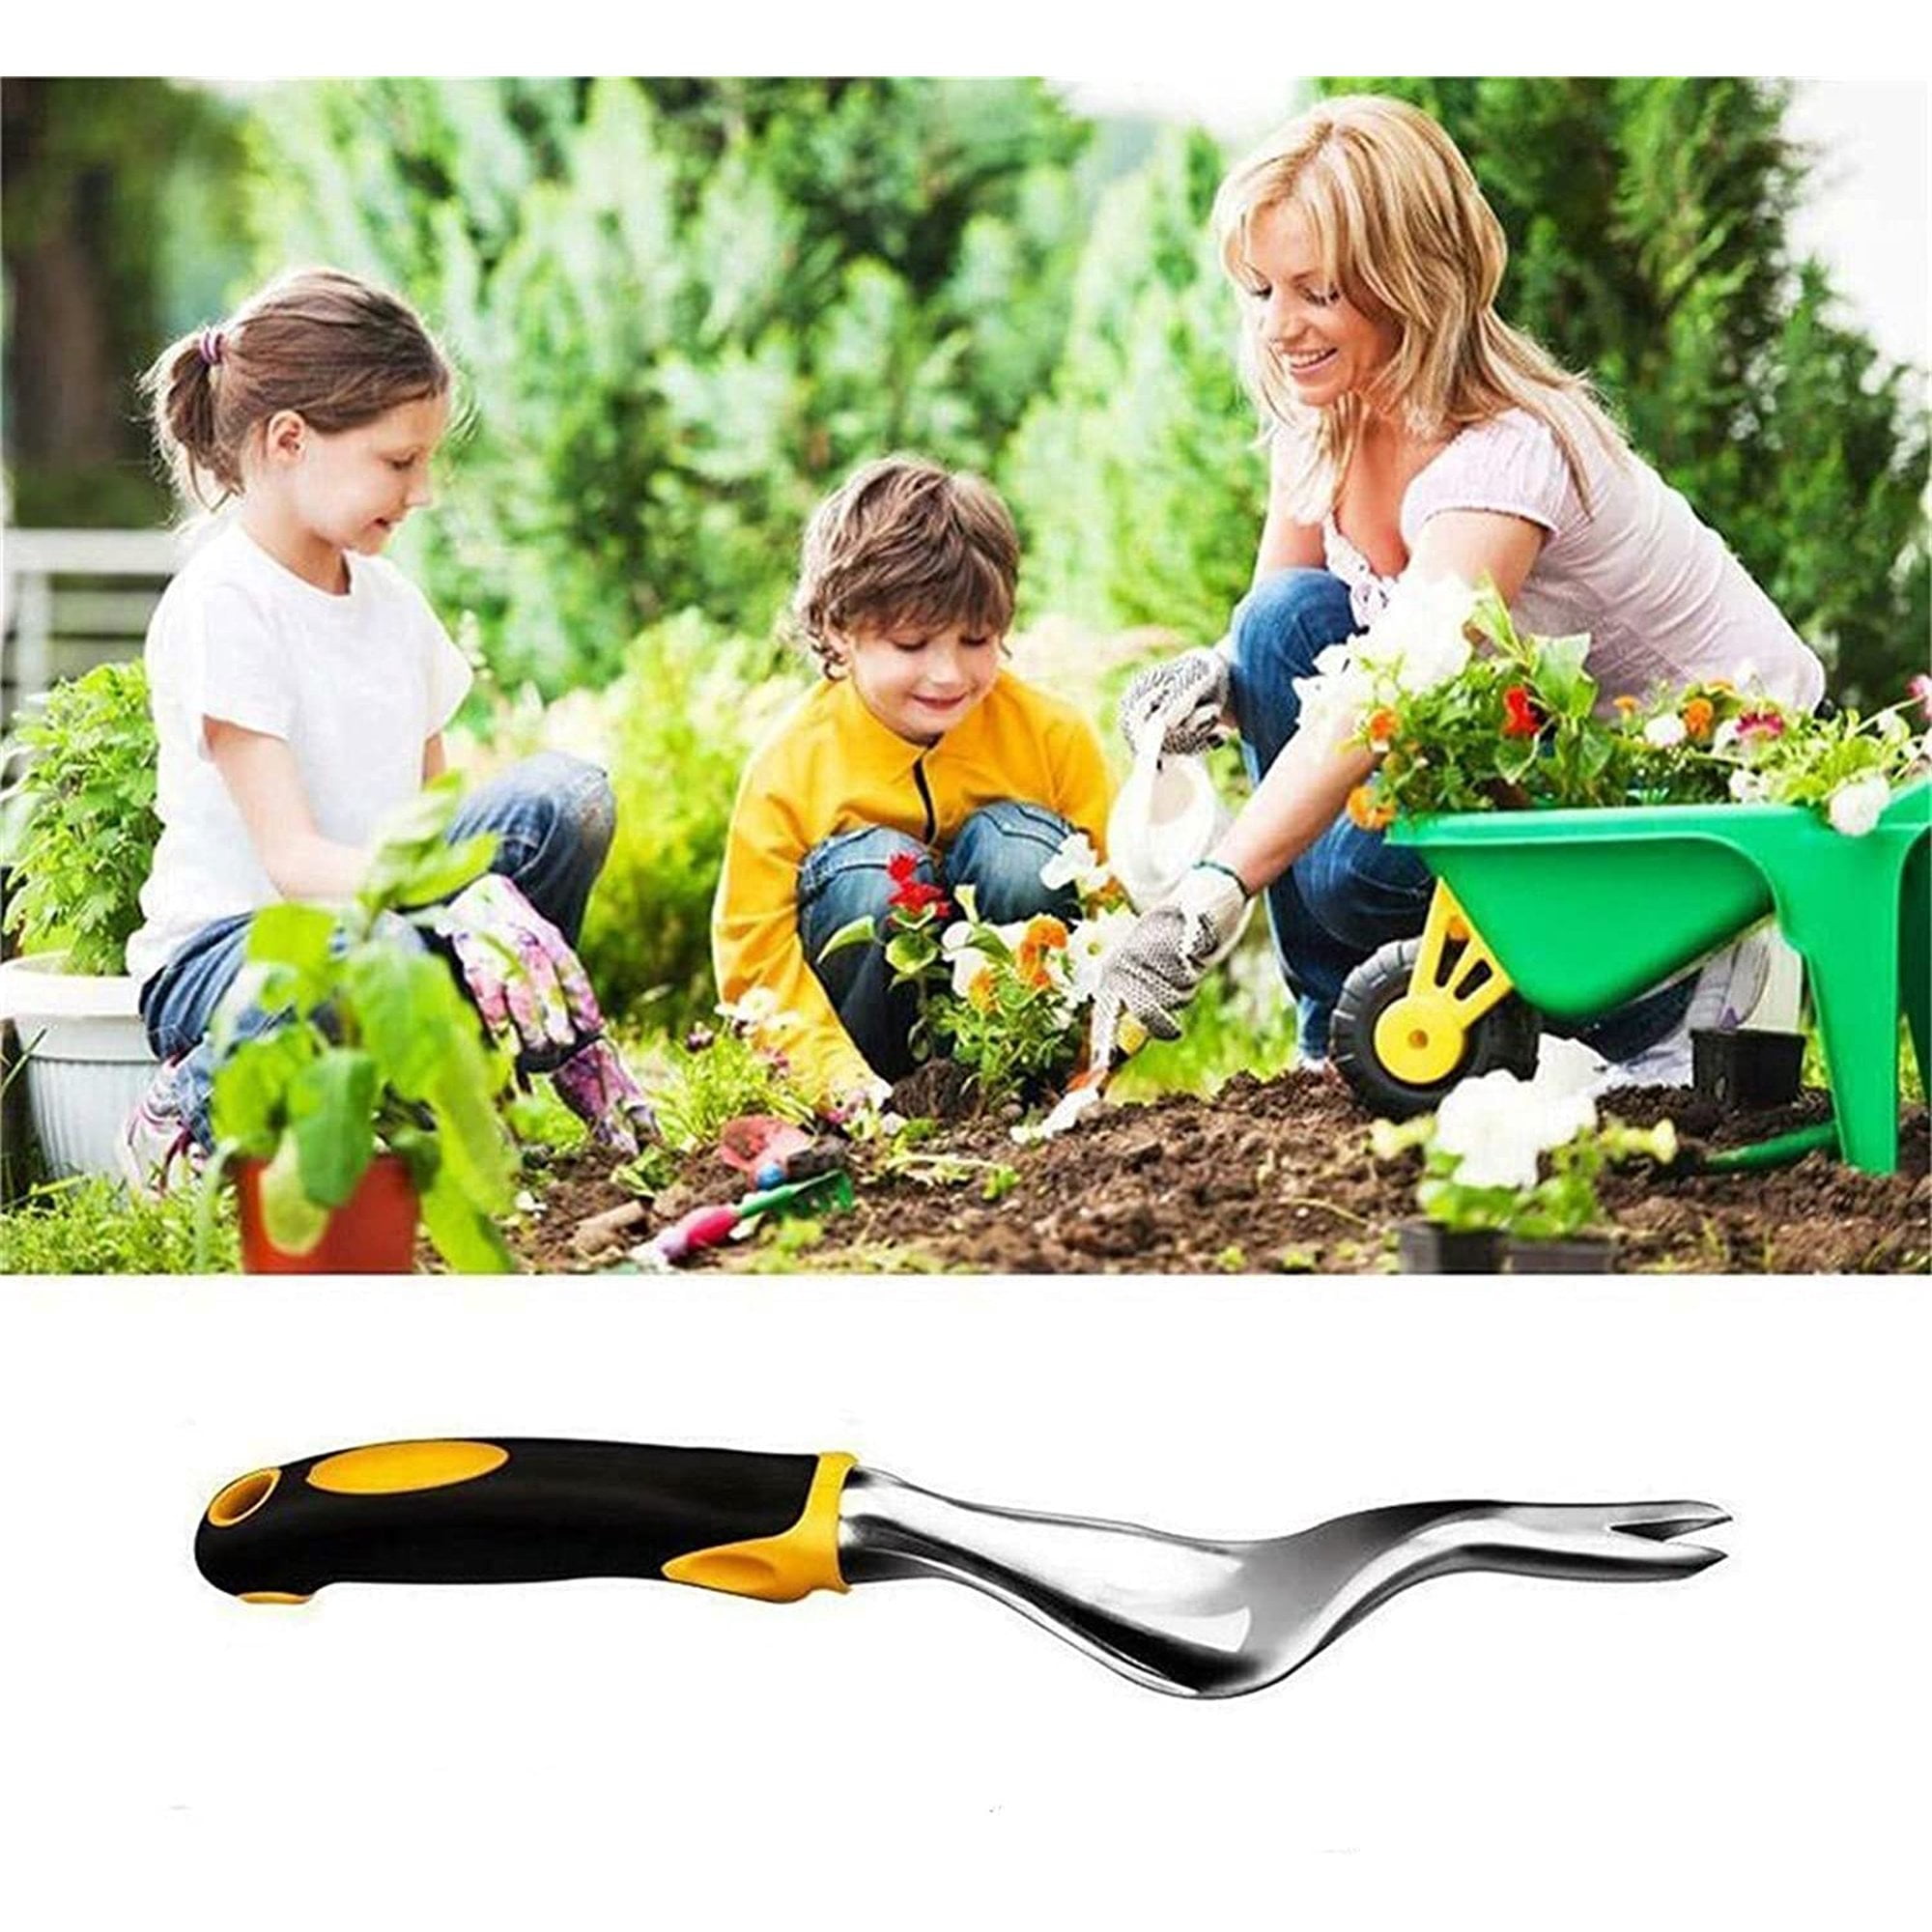 Swpeet 5Pcs Manual Weeders Puller Tool Kit Weed Puller Tool Garden Handle Weeder Removal Tool with Ergonomic Handle Weeding Tool with Protective Gloves for Garden Lawn Farmland Transplant 